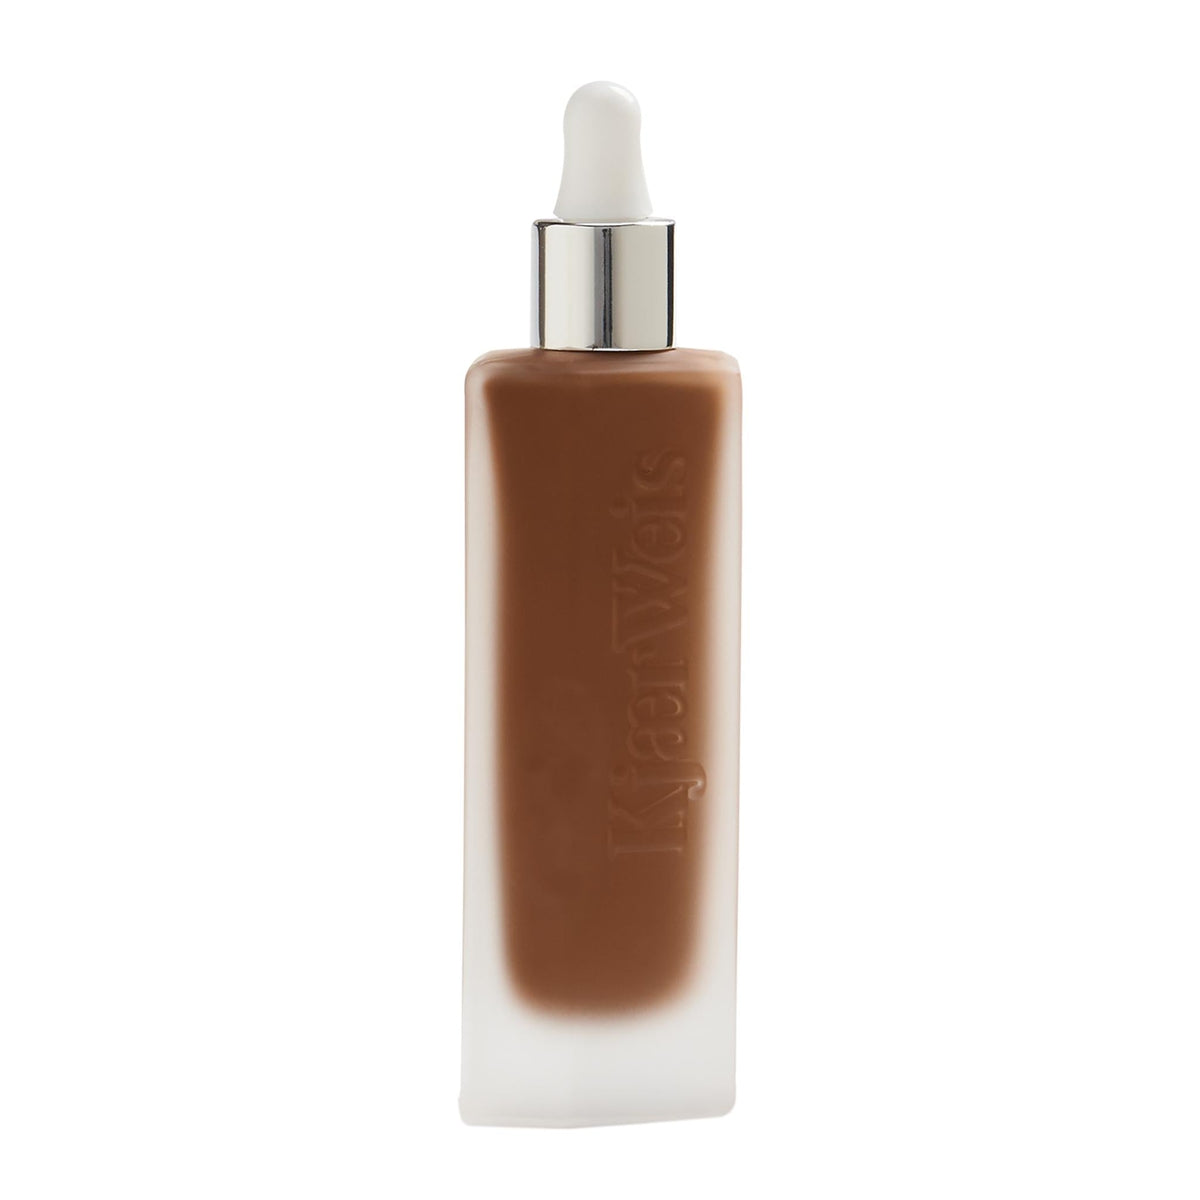 Kjaer Weis - Invisible Touch Liquid Foundation